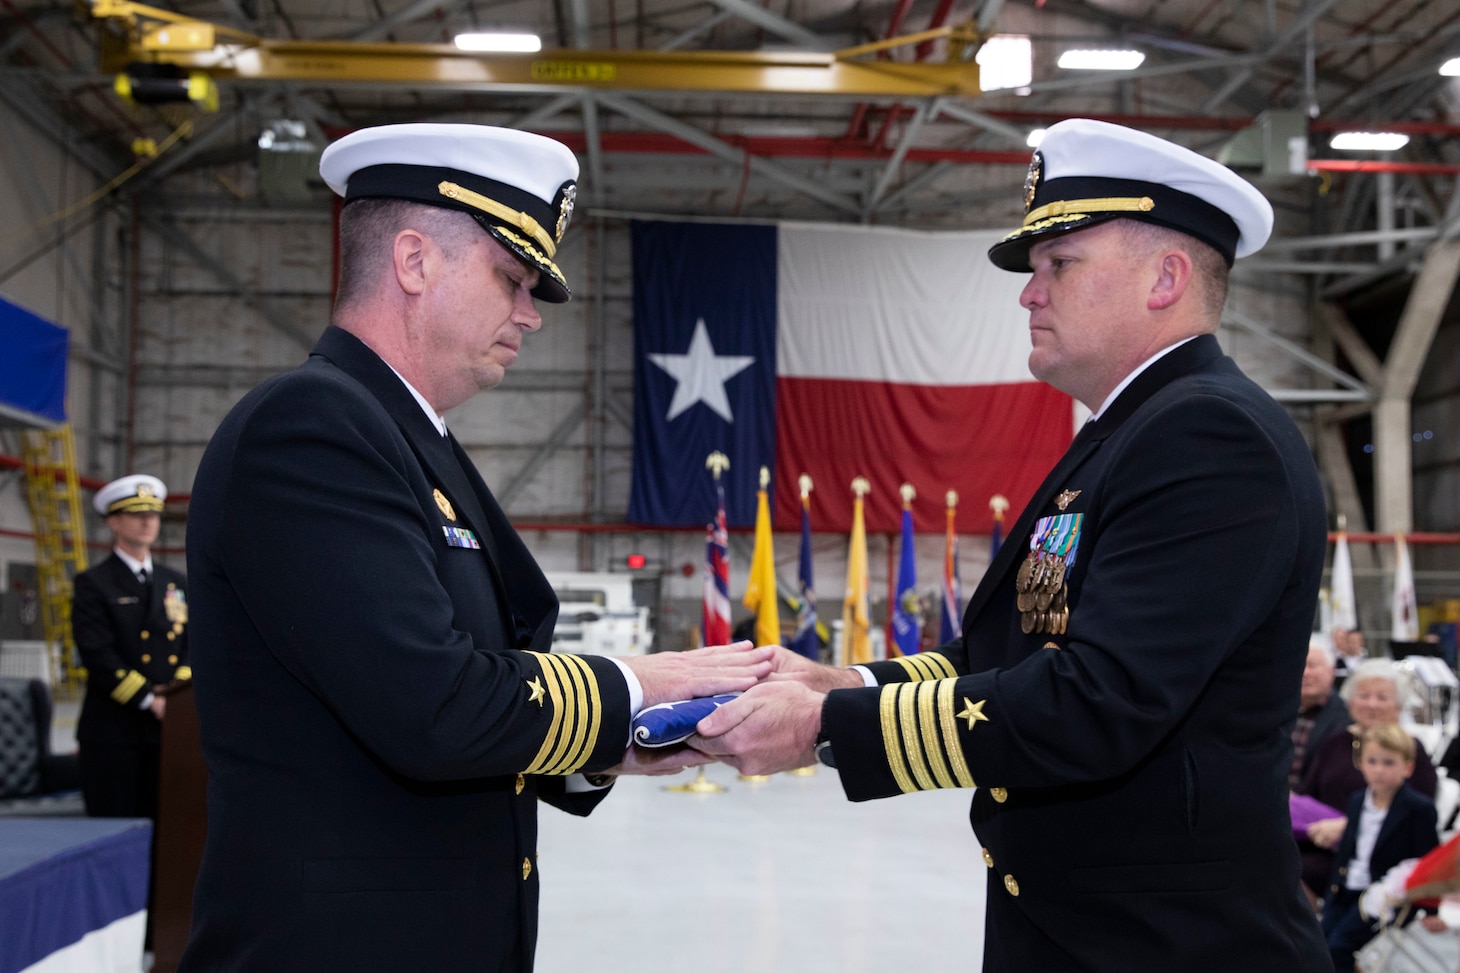 Capt. James Ward (right), Deputy Commodore of Commander, Fleet Logistics Support Wing (CFLSW), presents an American flag to outgoing CFLSW Capt. Ian Hawley (right) during Hawley's retirement ceremony.